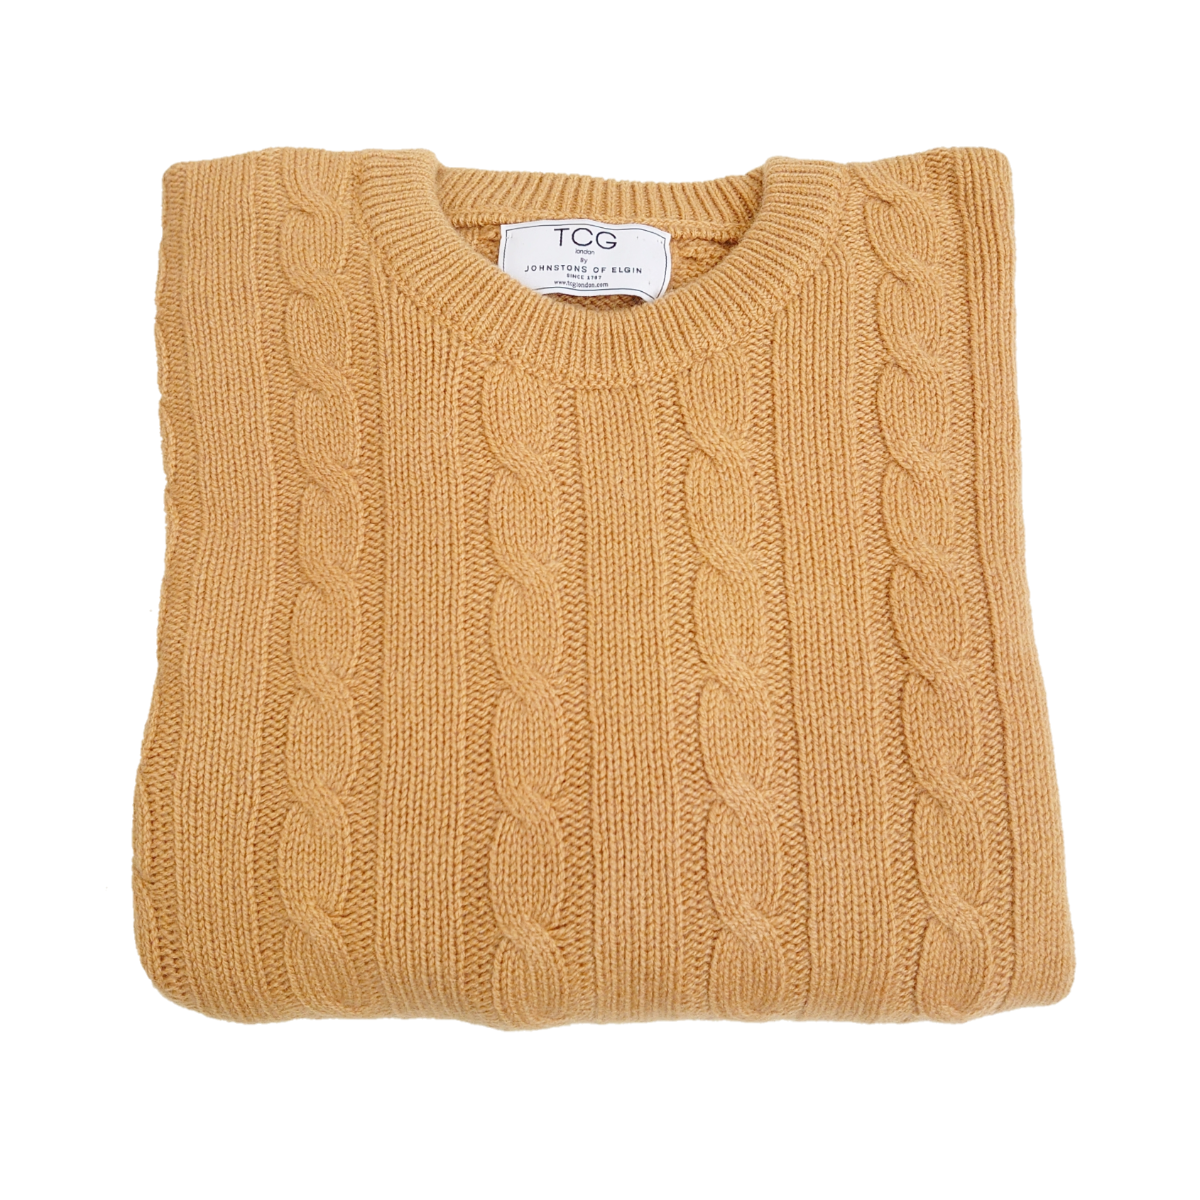 Men's Oversized Fit Chunky 100% Pure Cashmere Jumper - Classic Cable Knit - Camel - L